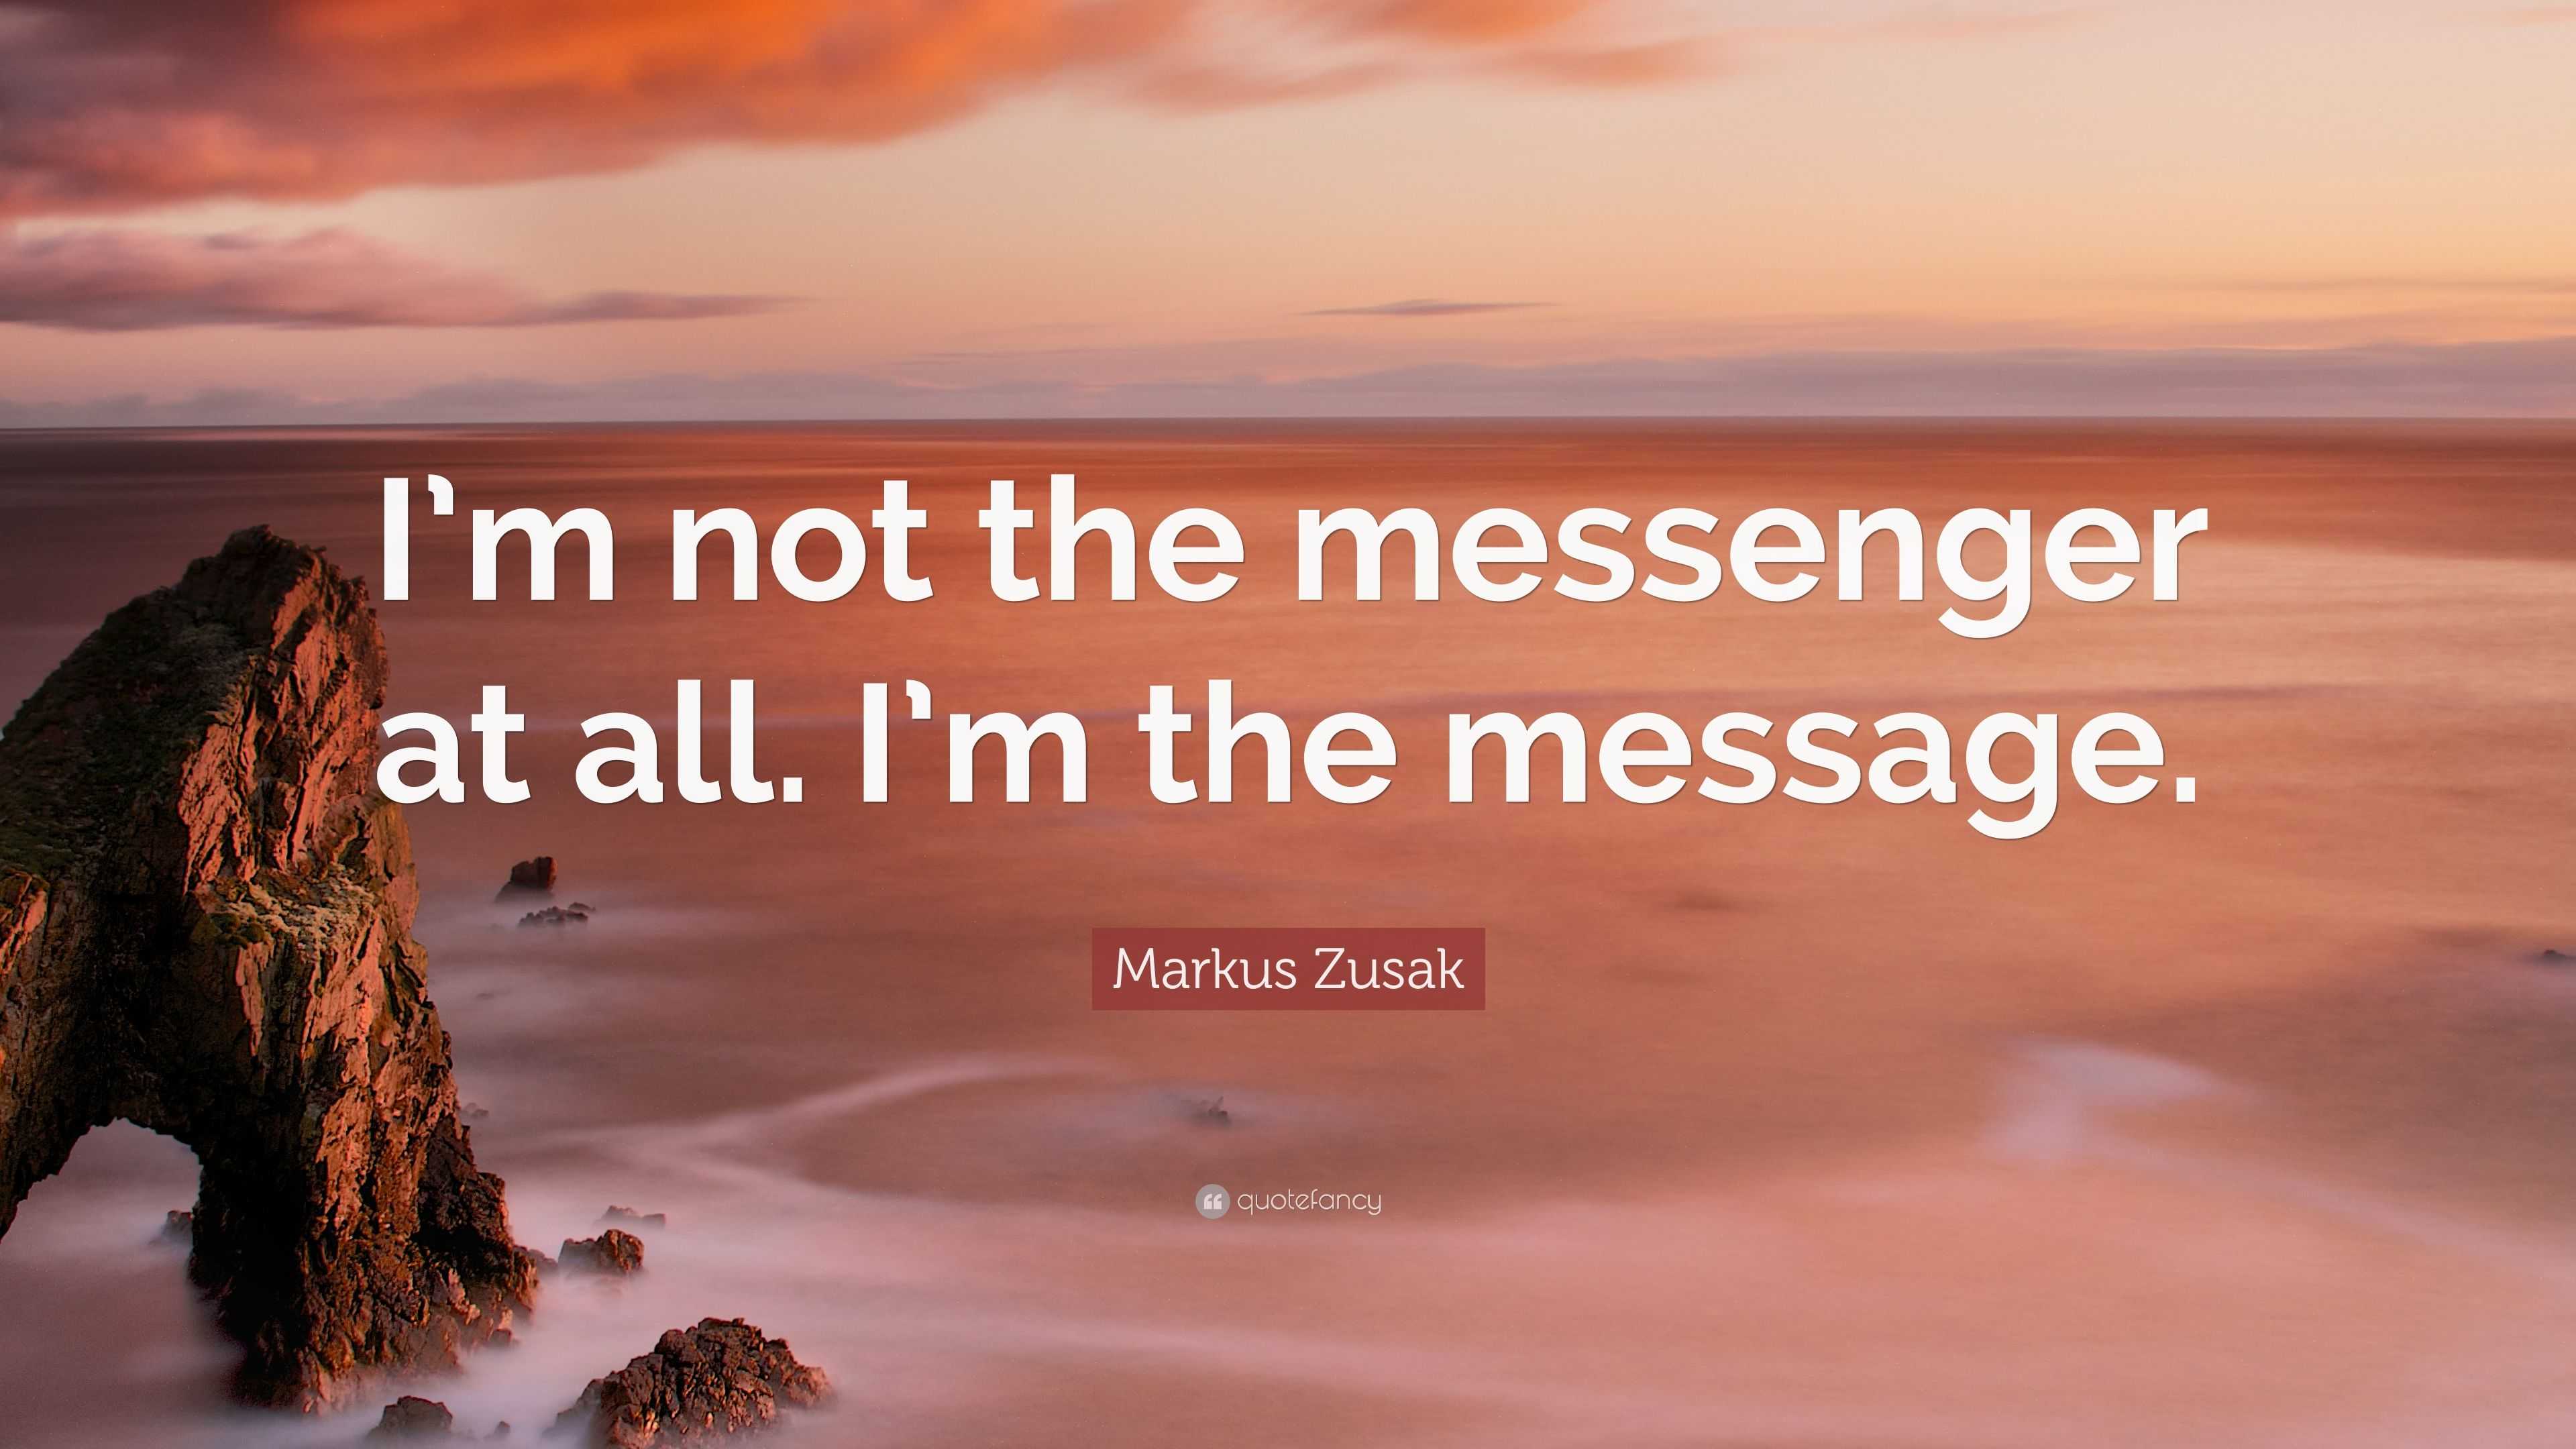 Markus Zusak Quote: “I’m not the messenger at all. I’m the message.”